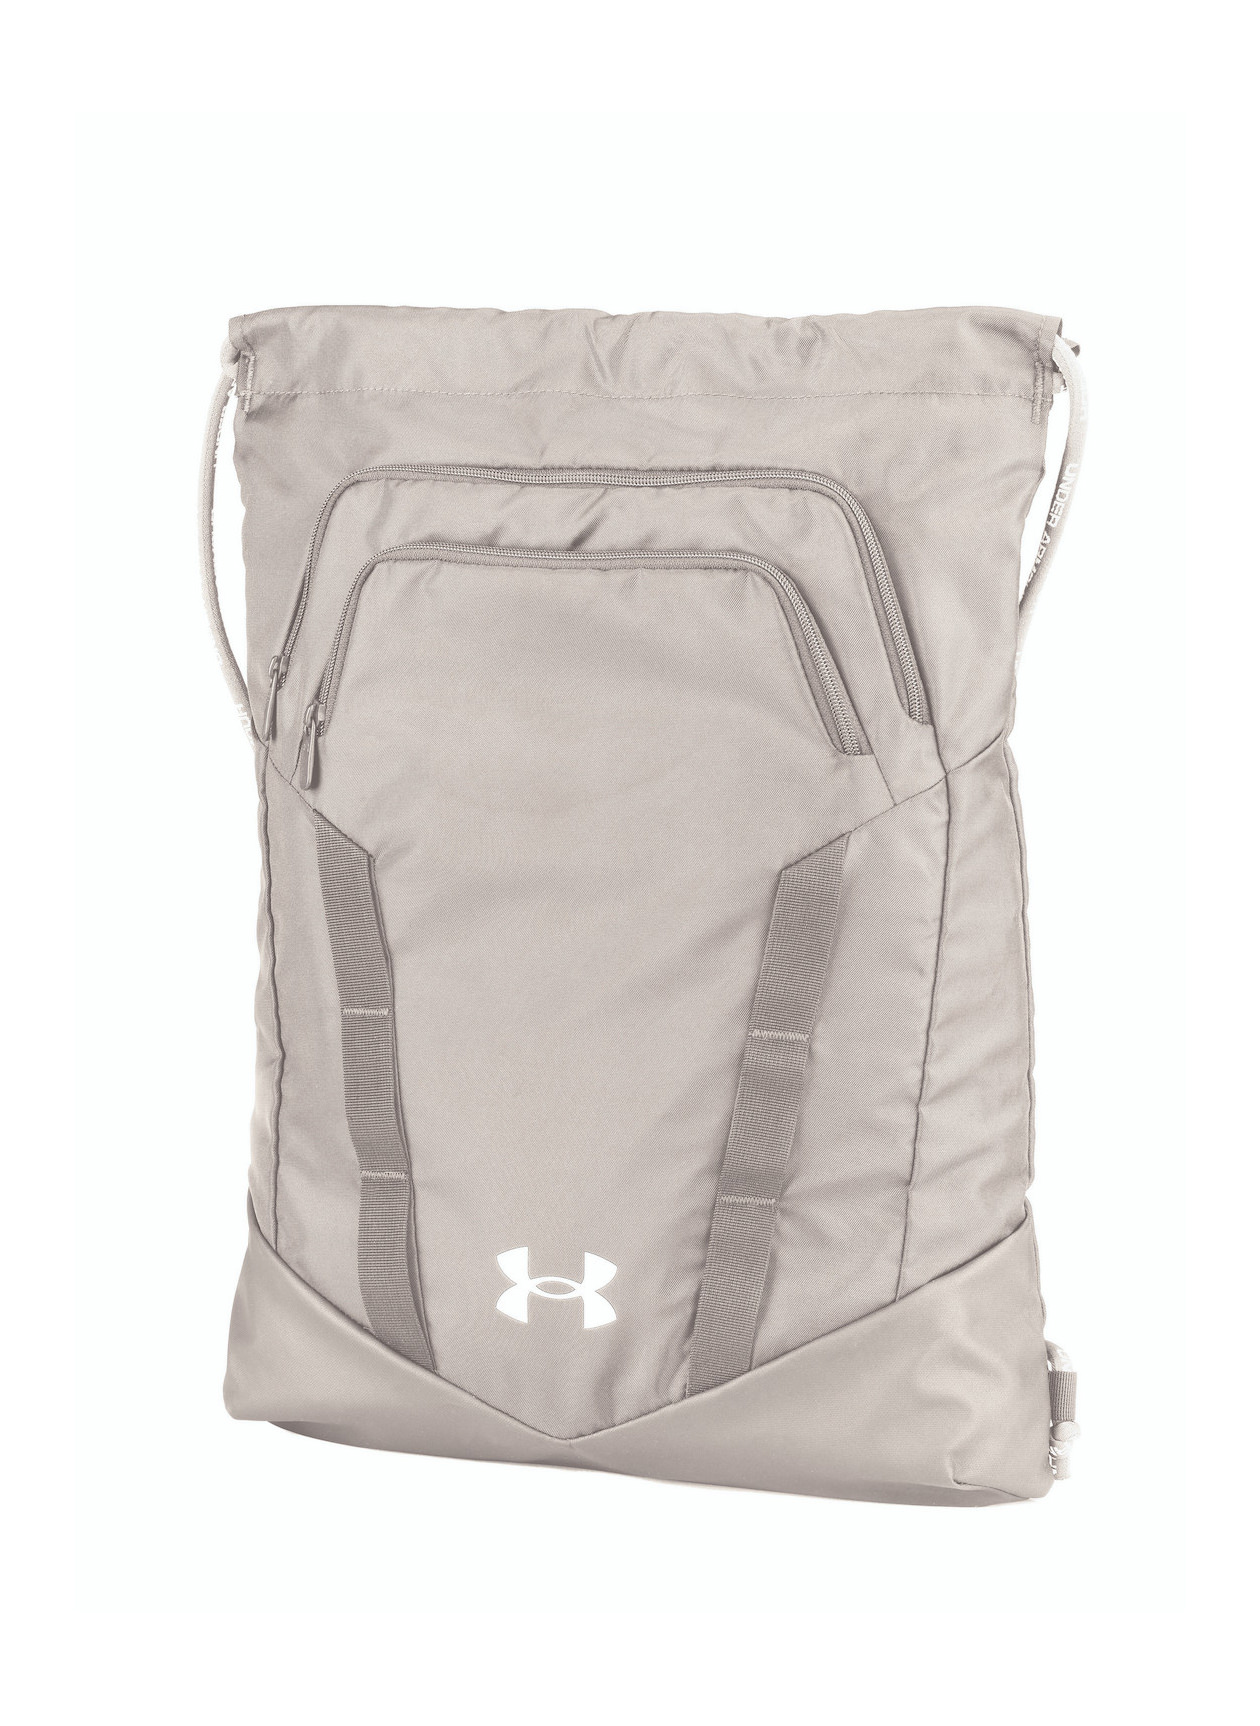 Under Armour Summit White Undeniable Sackpack 2.0